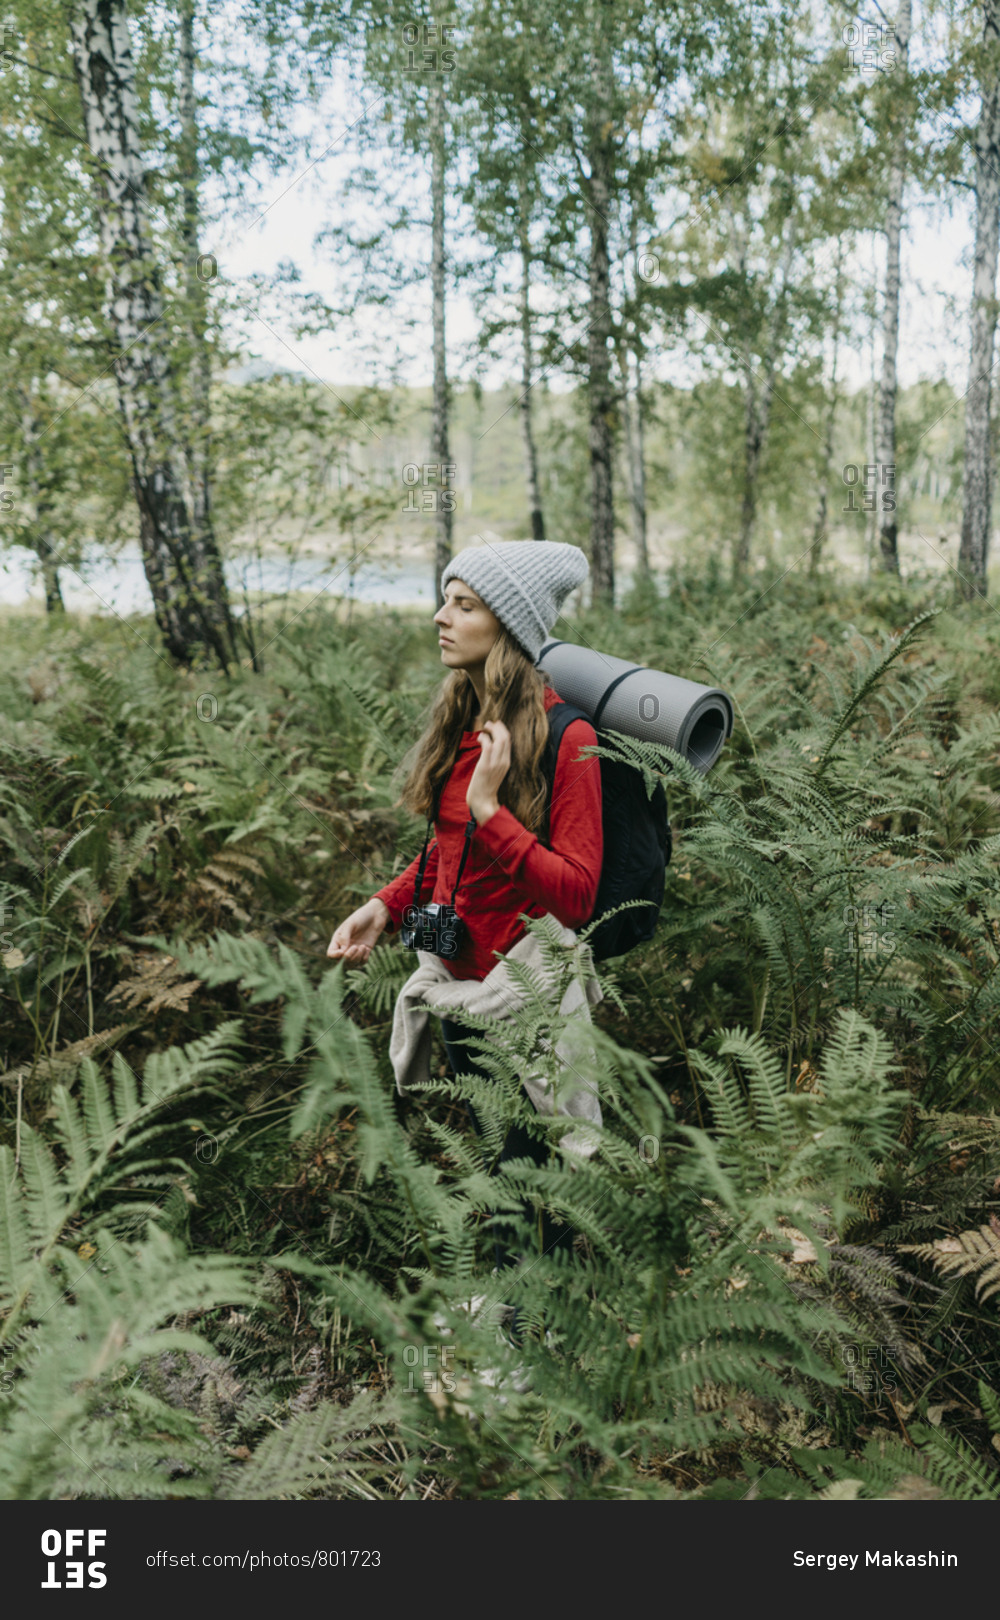 Portrait of a beautiful young woman with backpack and film camera takes photos in the fern bushes in the forest